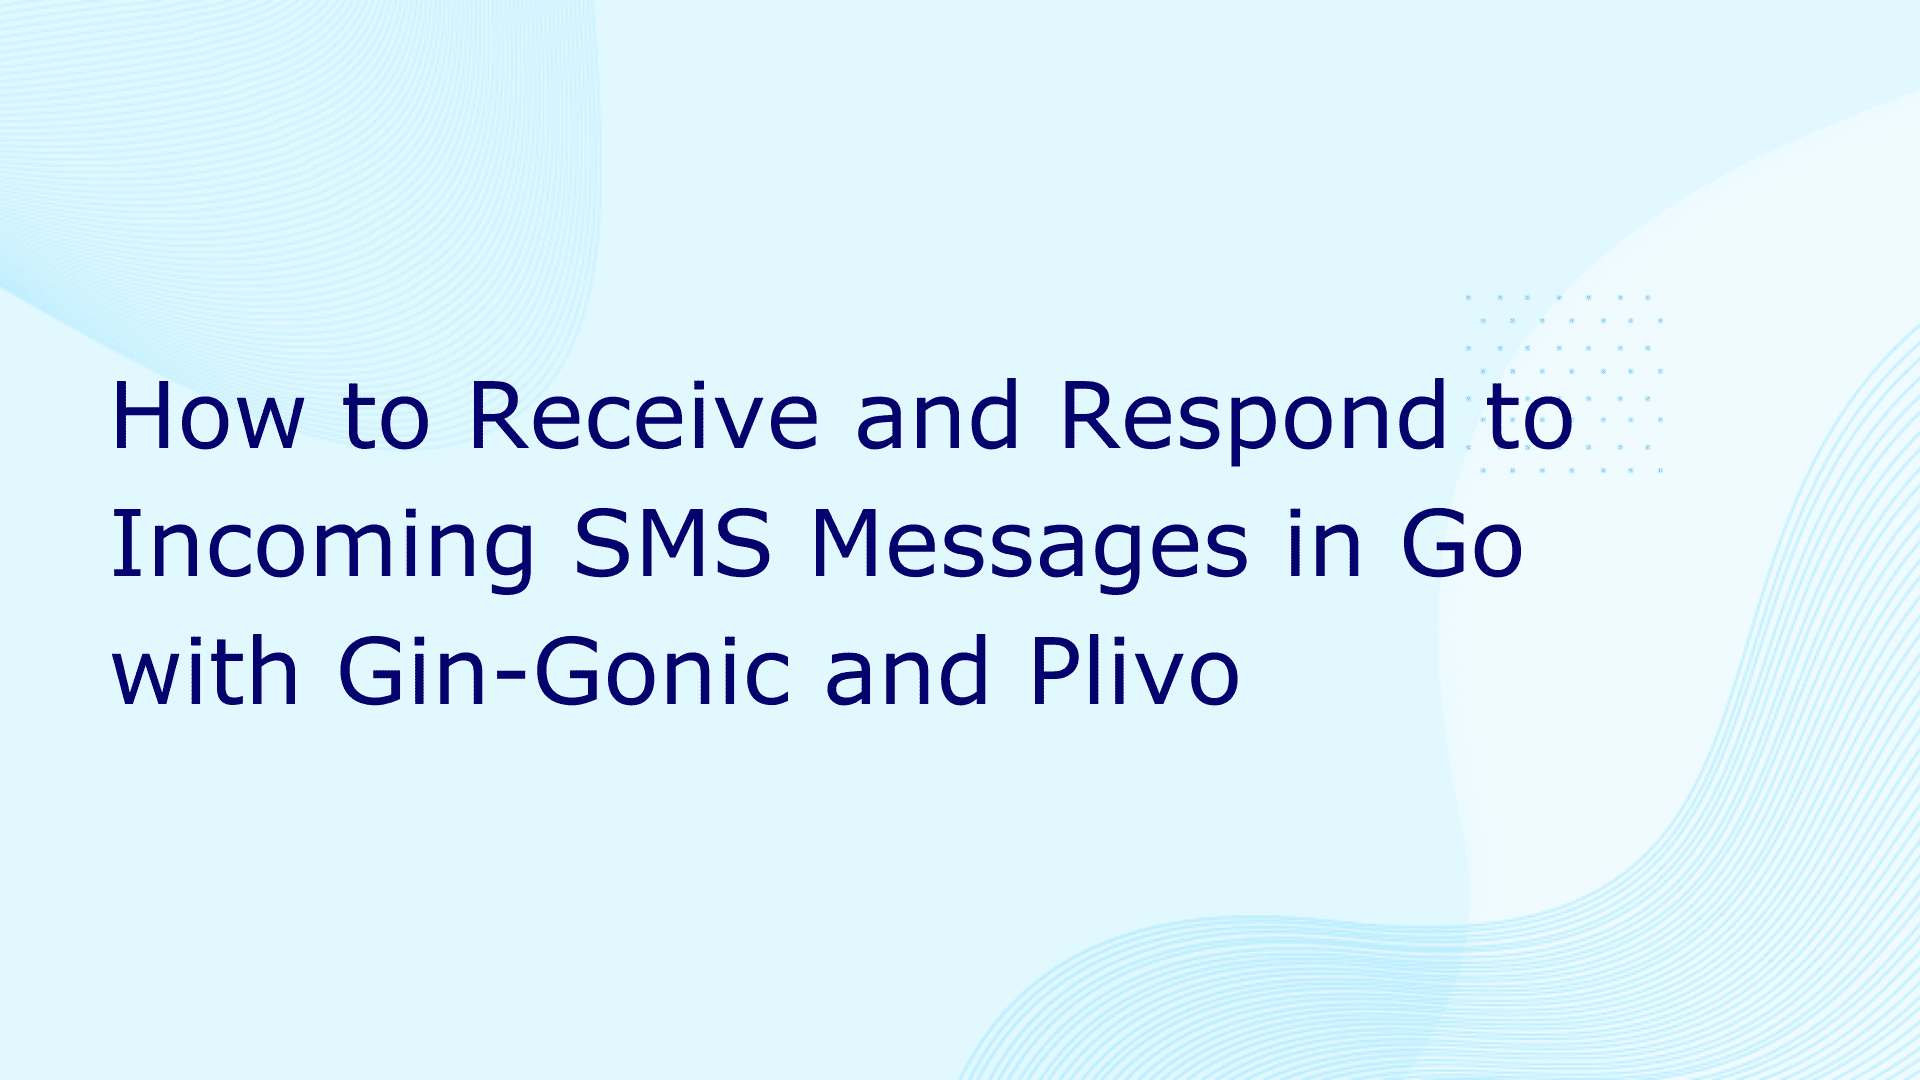 How to Receive and Respond to Incoming SMS Messages in Go with Gin and Plivo